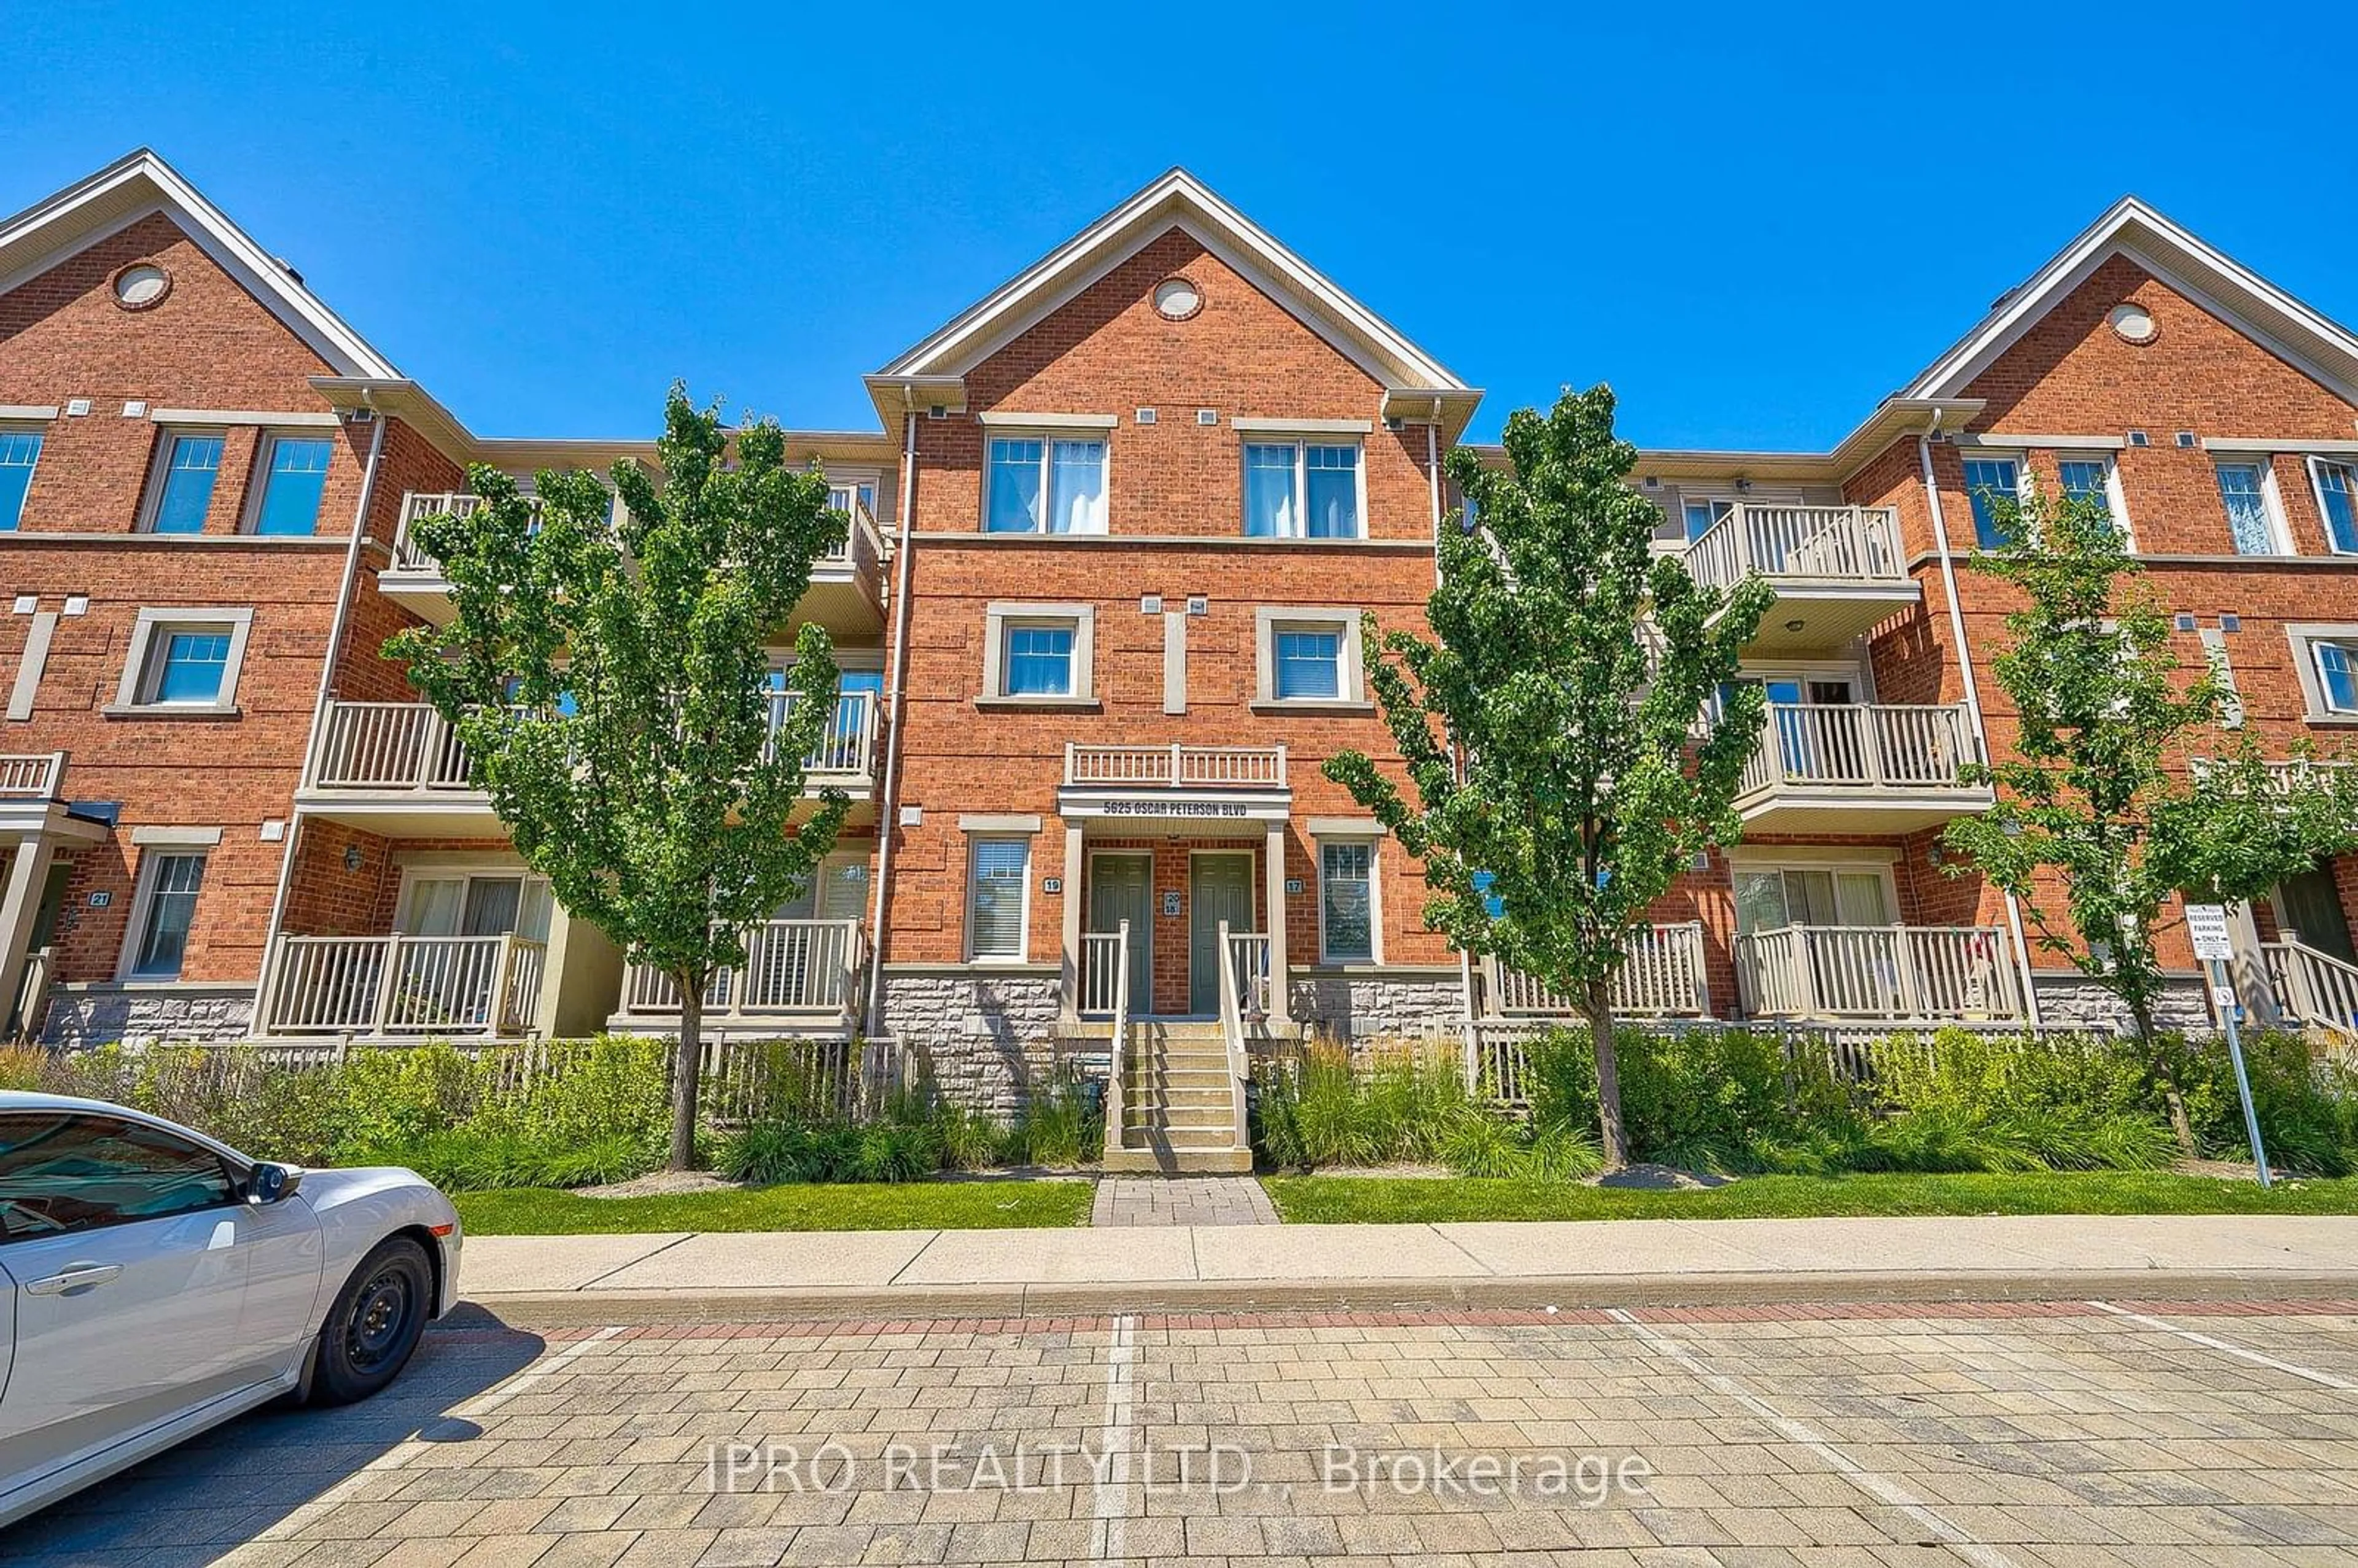 A pic from exterior of the house or condo for 5625 Oscar Peterson Blvd #18, Mississauga Ontario L5M 0T2